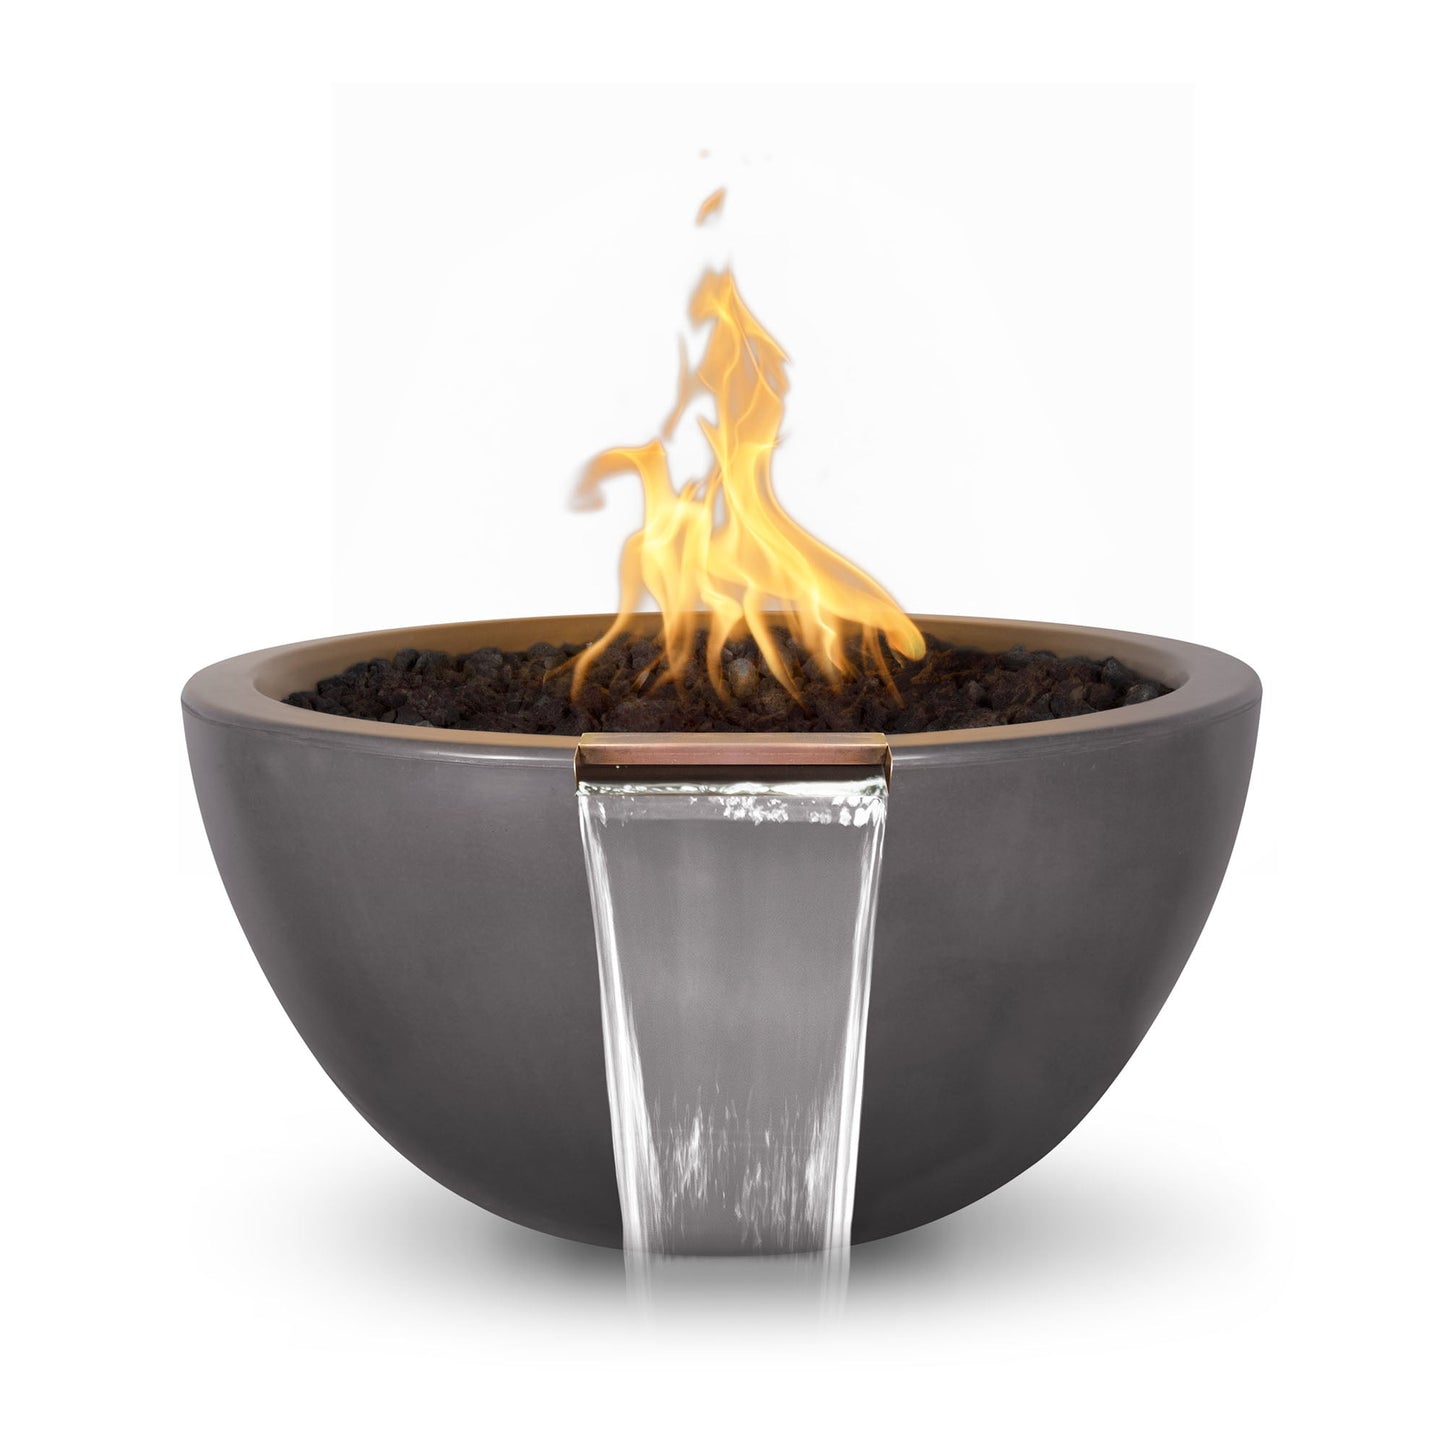 The Outdoor Plus Round Luna 30" Metallic Bronze GFRC Concrete Liquid Propane Fire & Water Bowl with Match Lit with Flame Sense Ignition